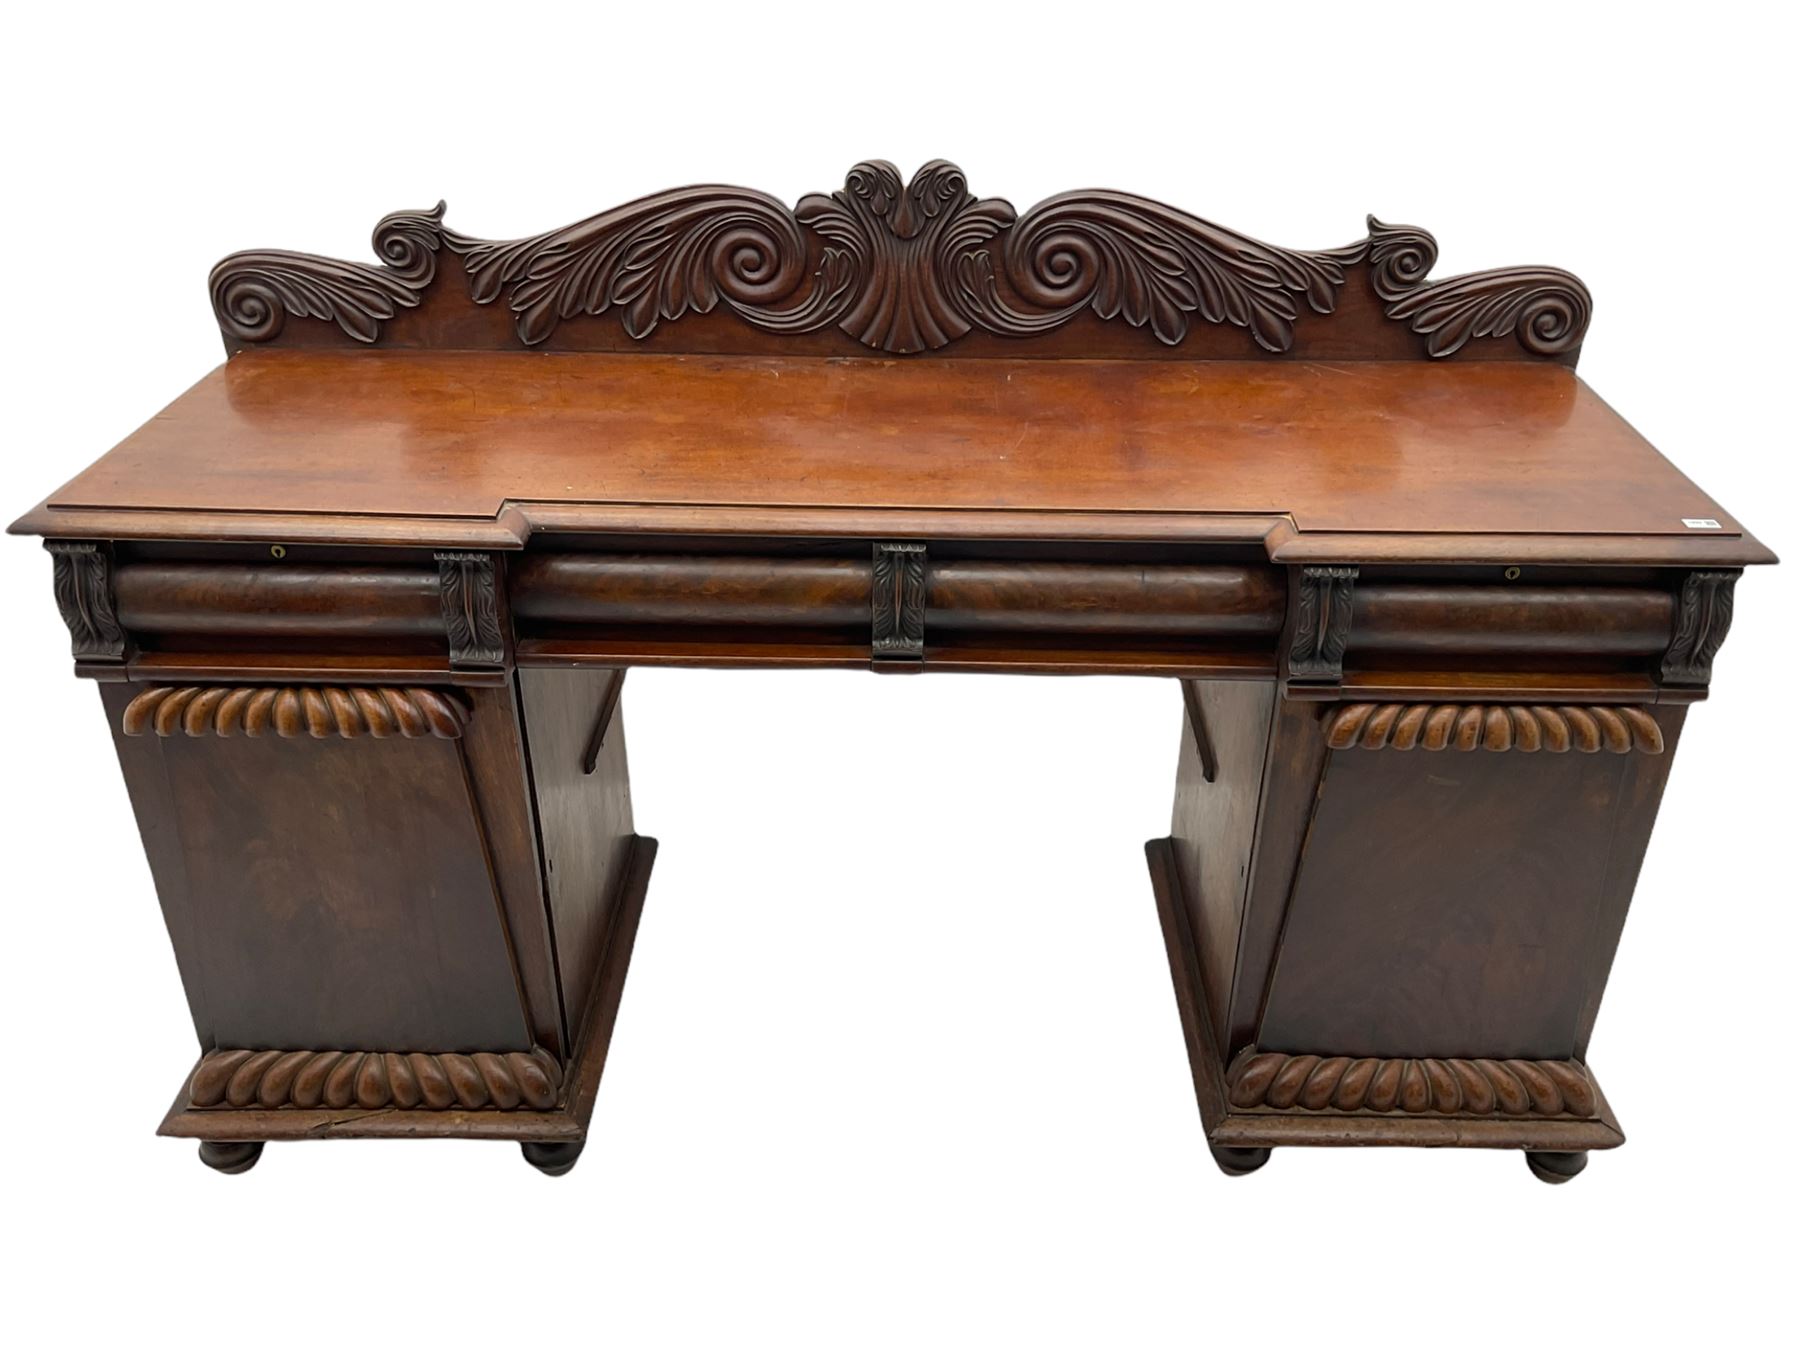 Early 19th century figured mahogany twin pedestal sideboard - Image 2 of 10